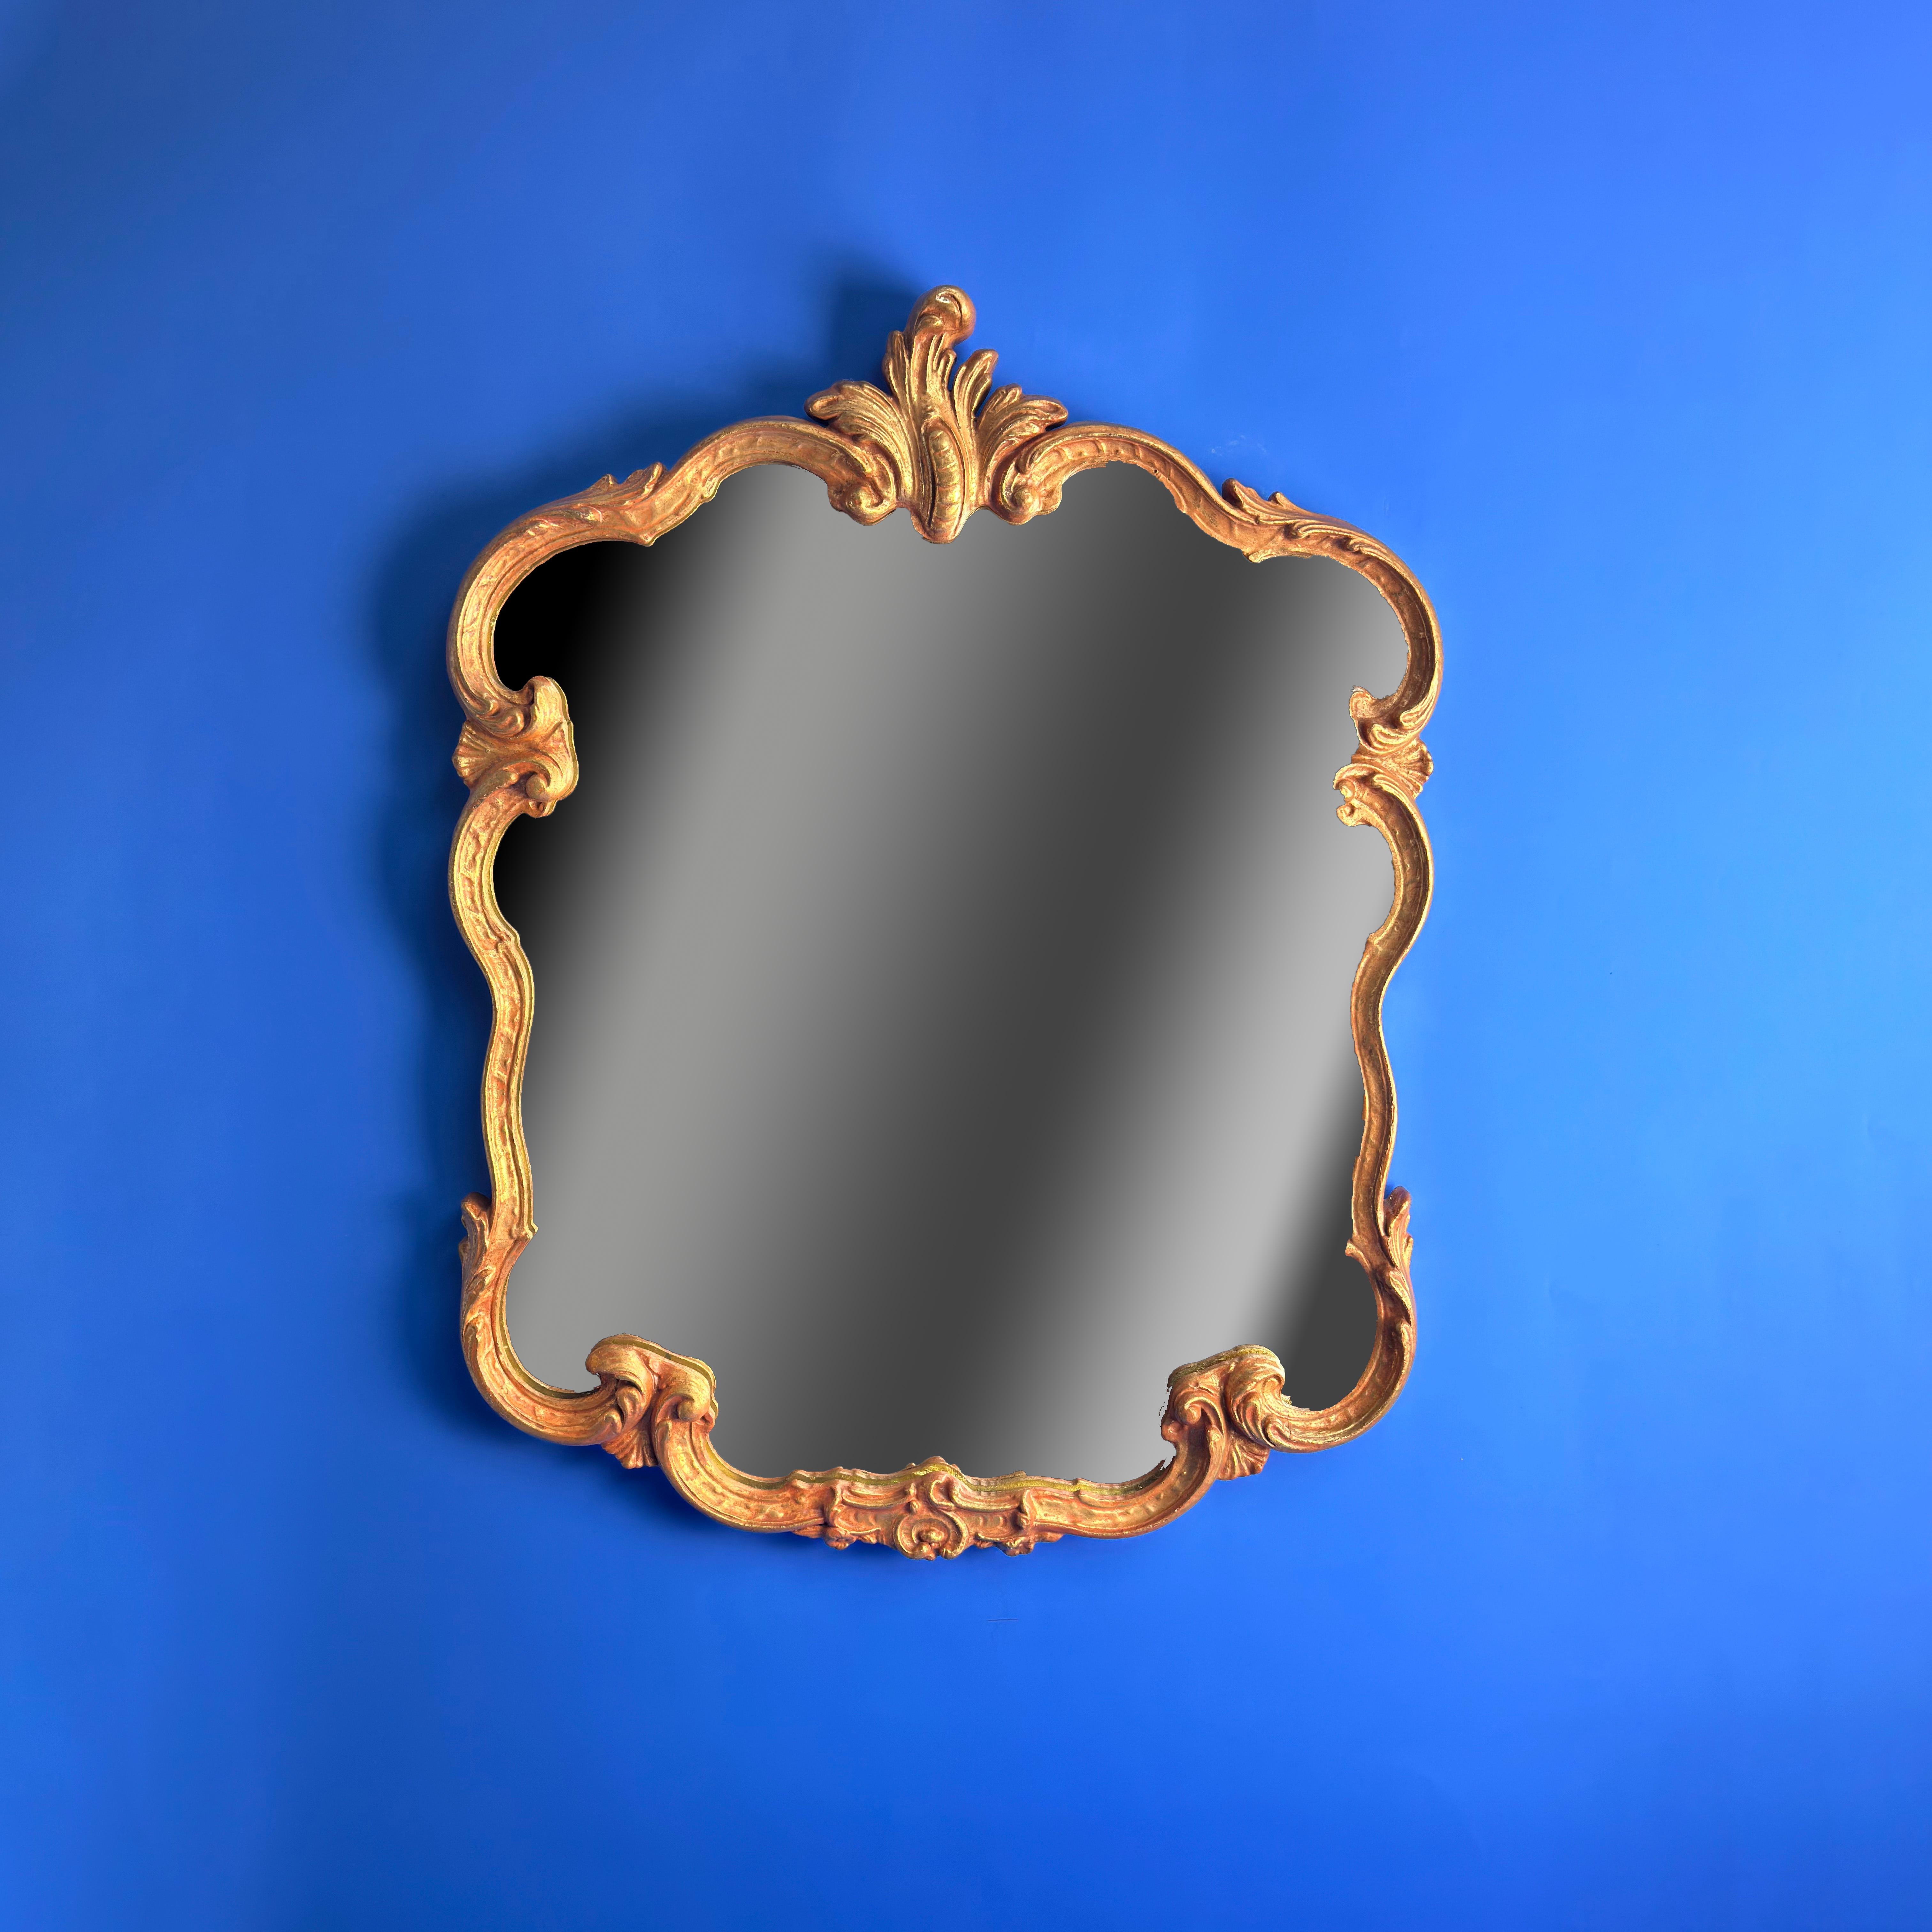  1960s French Rococo-Style Gilded Wall Mirror 

This Rococo-style wall mirror from the 1960s boasts a simplified elegance with its thin, gesso plaster frame adorned with acanthus leaves and shell detailing, finished in lustrous gold leaf. Recently